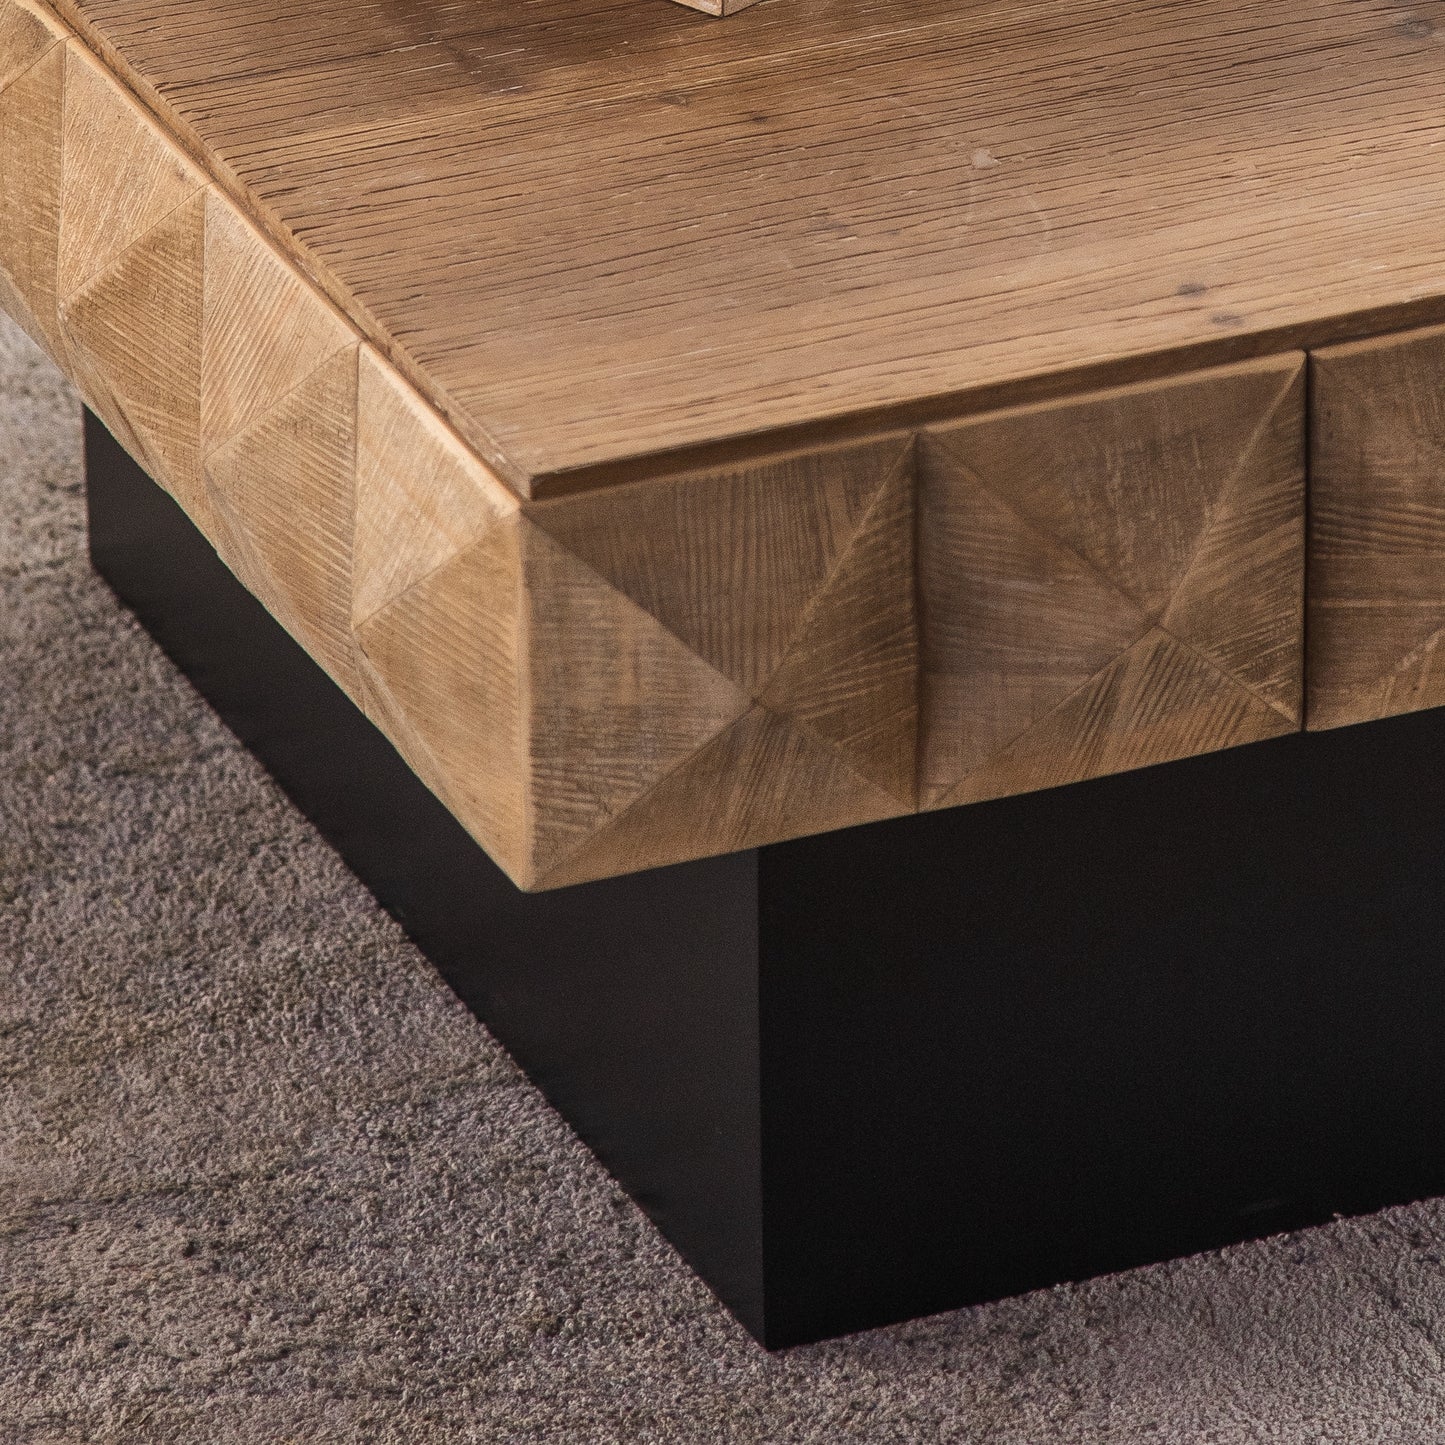 41.73"Three-dimensional Embossed  Pattern Square Retro Coffee Table with 2 Drawers and MDF Base - Enova Luxe Home Store